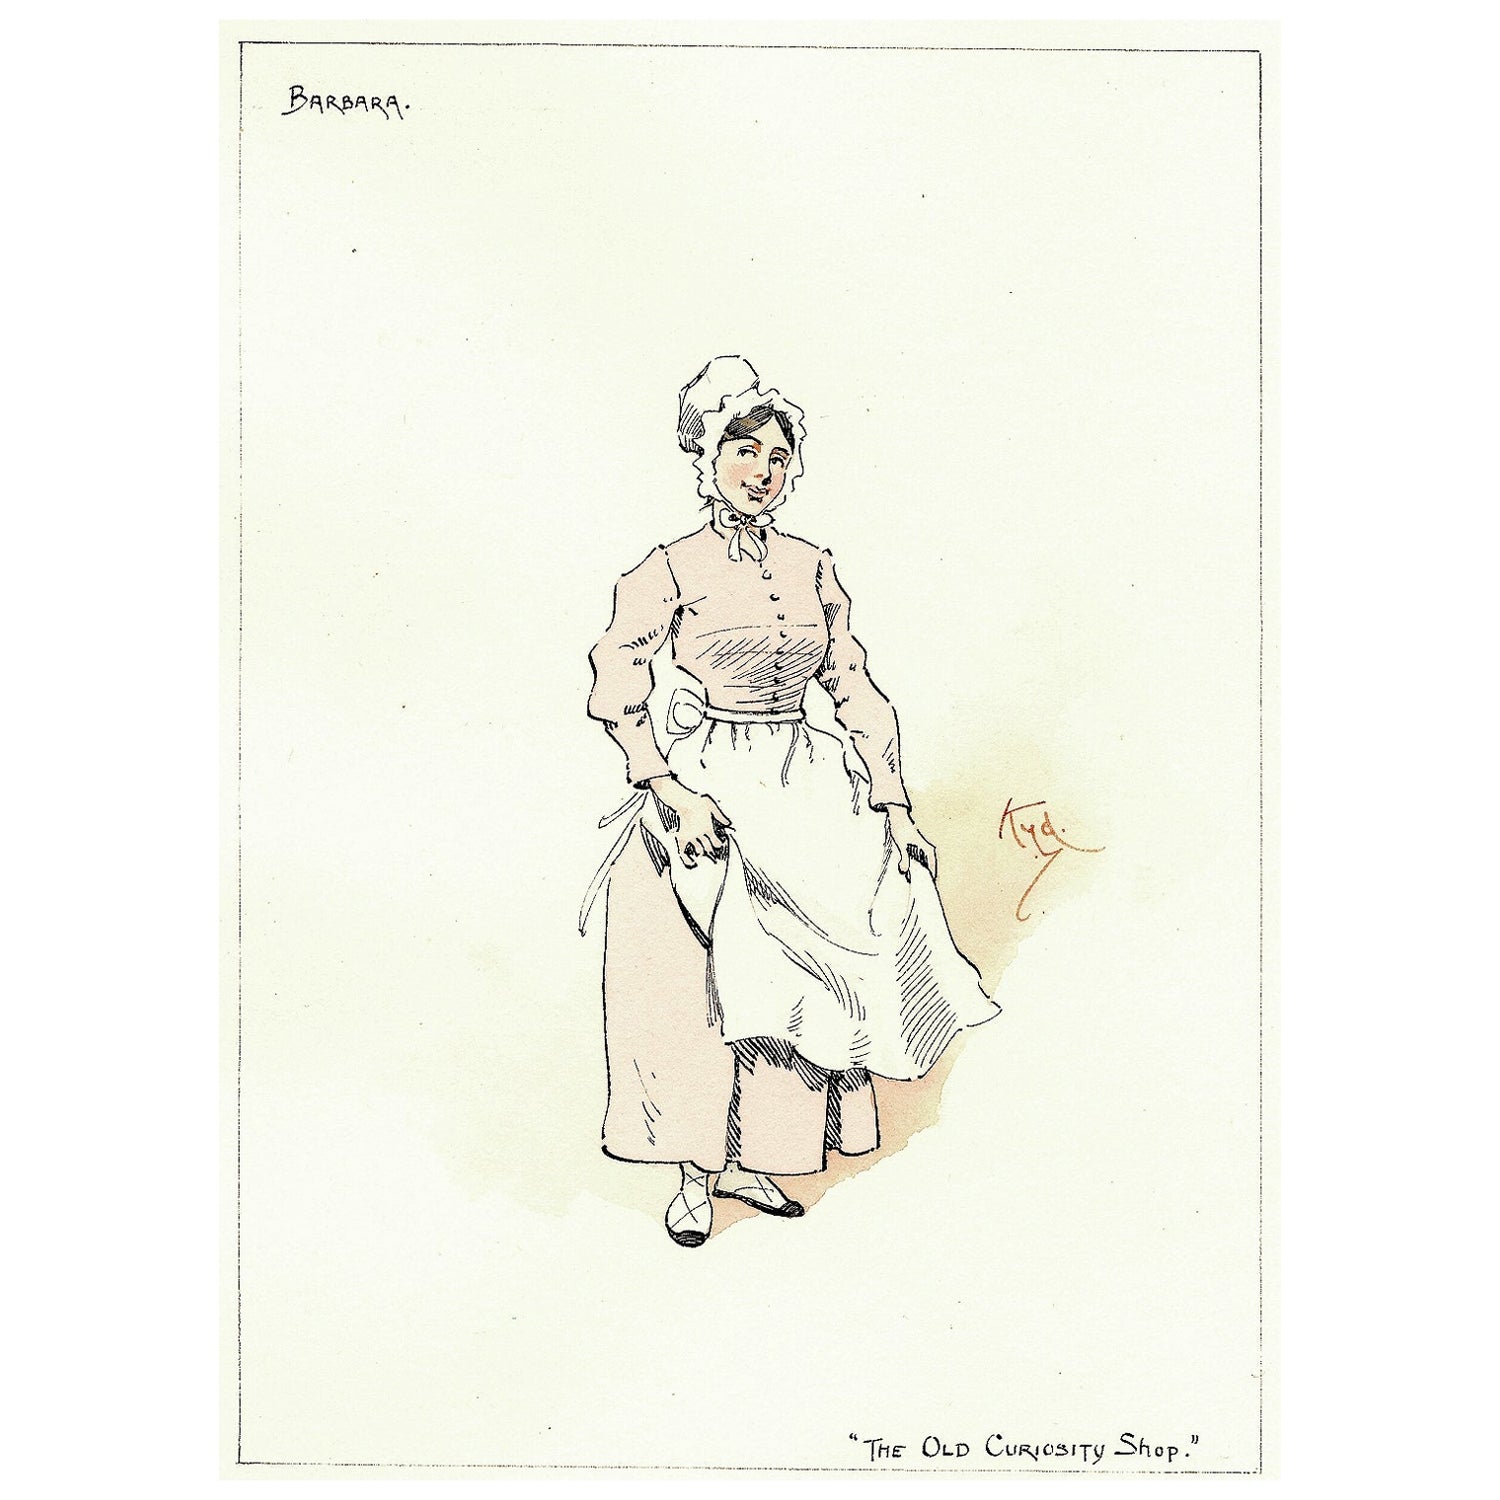 (KYD) - DICKENS - Barbara (from The Old Curiosity Shop) - ORIGINAL SKETCH For Sale